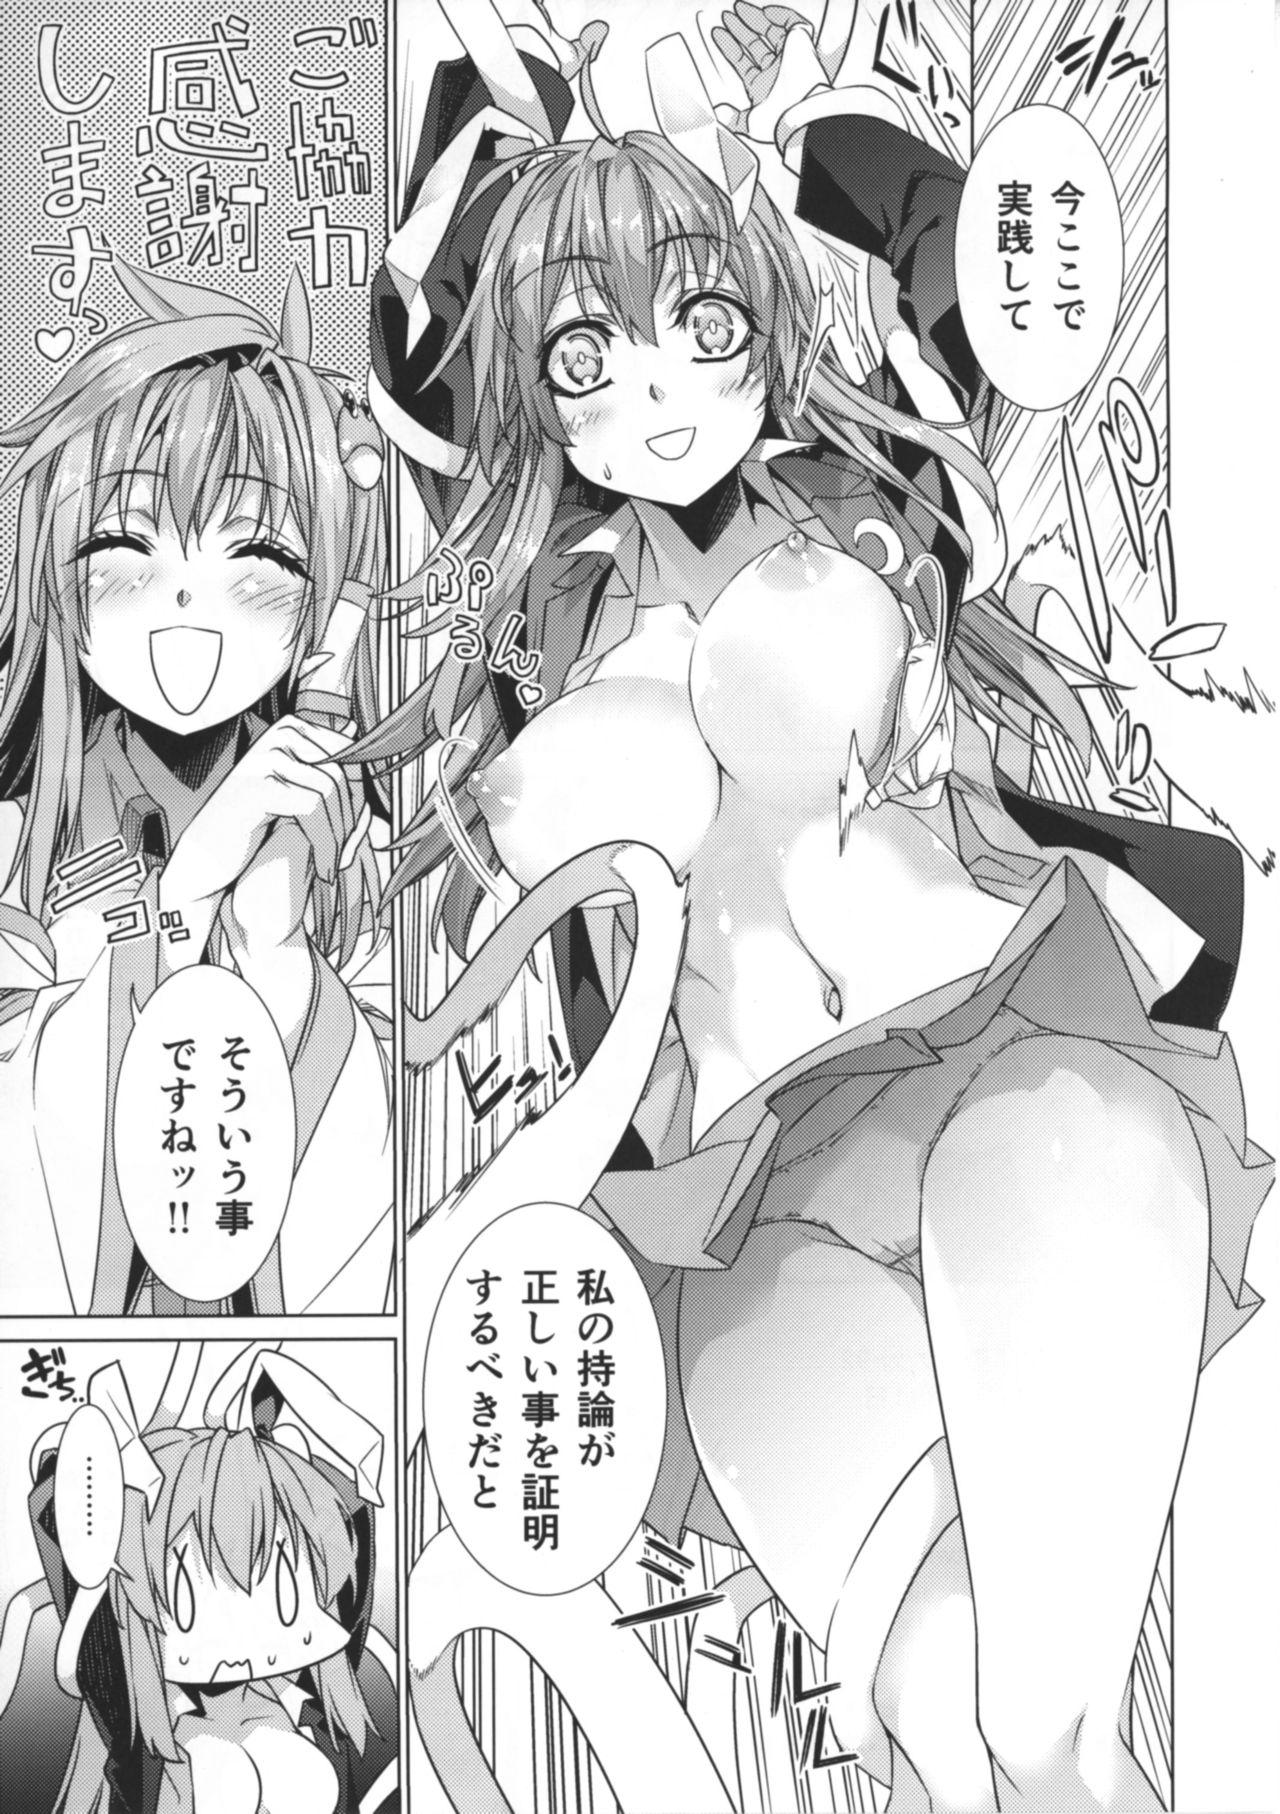 White Chick Sanae Udon 10 tama - Touhou project Cogiendo - Page 18